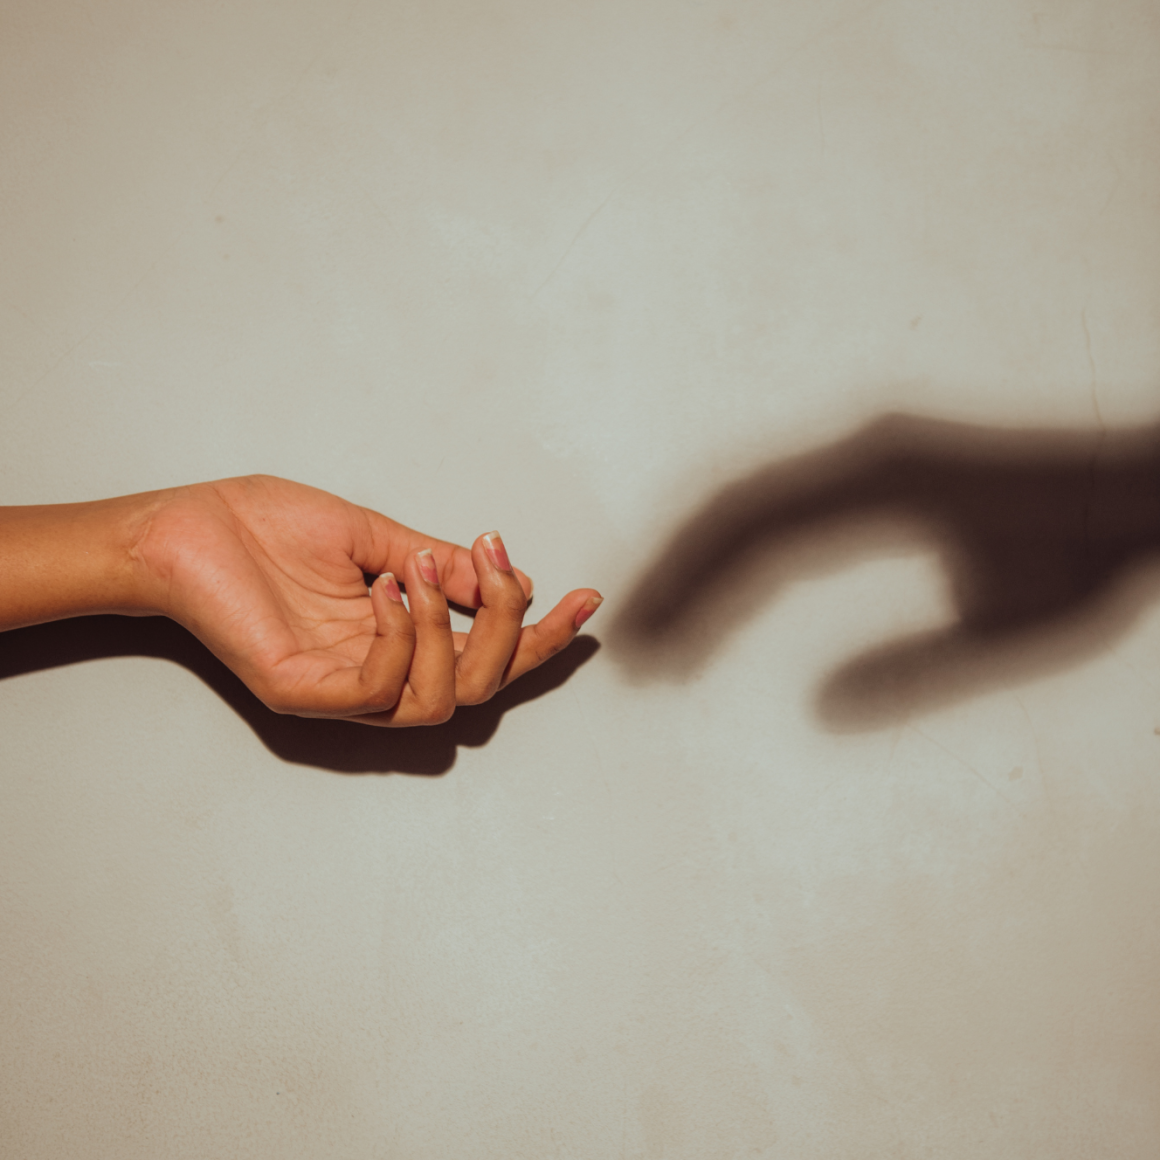 A hand reaching out to a shadow of a hand